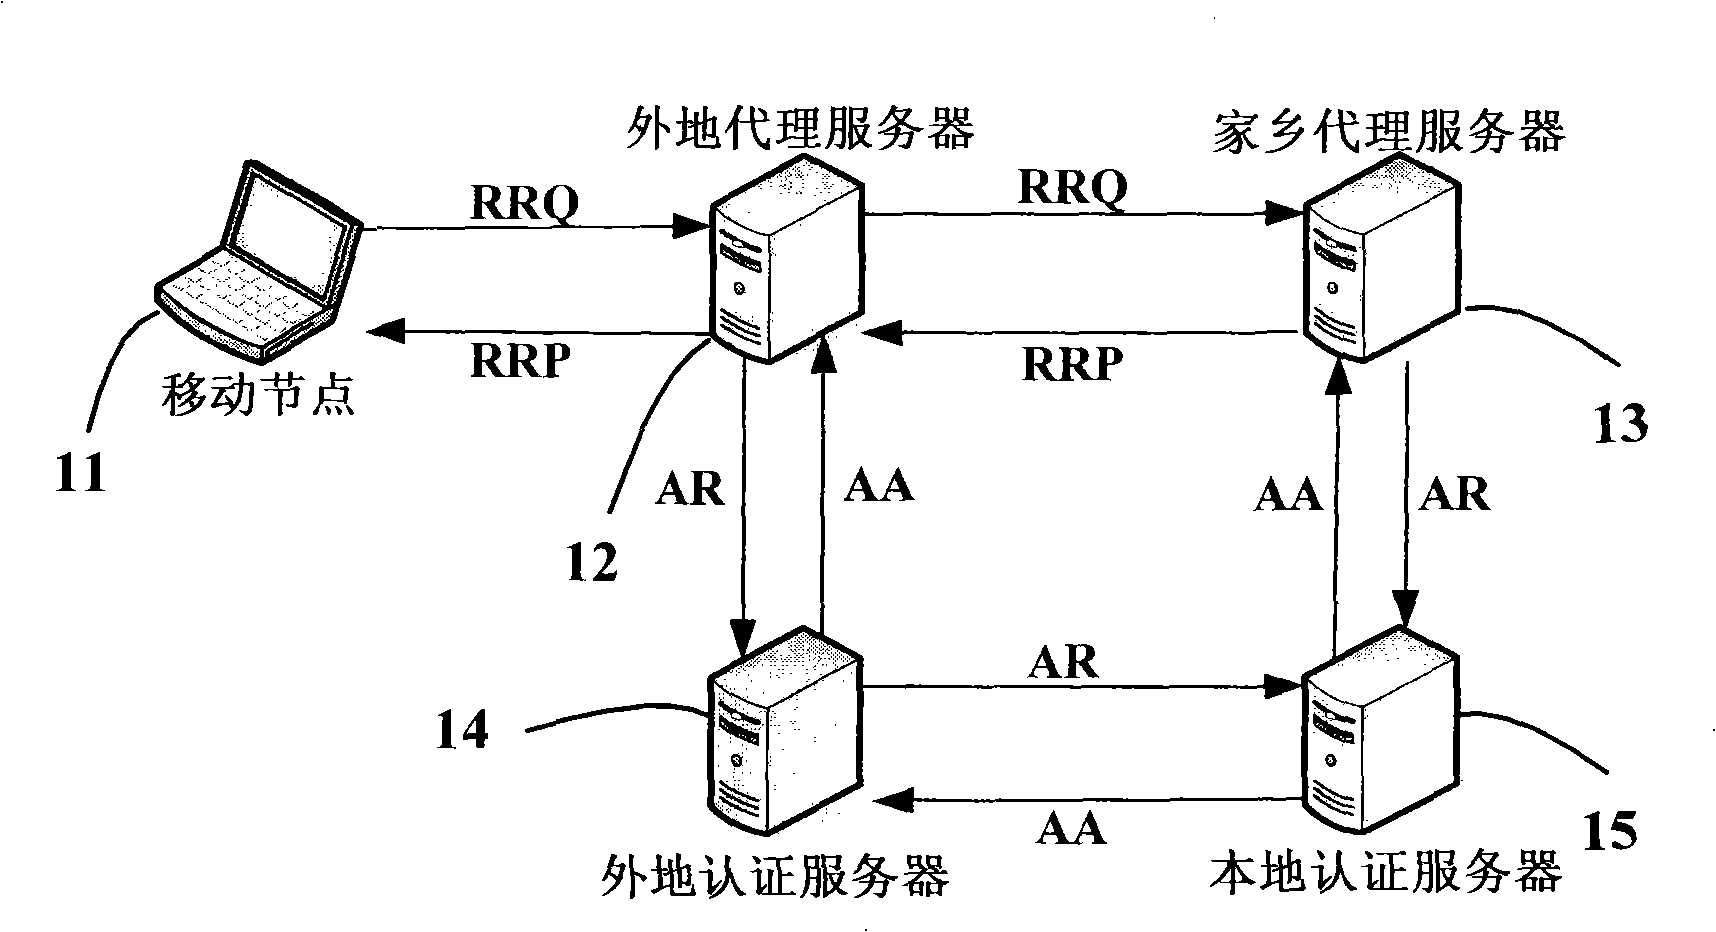 Compatible method and system for mobile IP application based on RADIUS and DIAMETER protocol